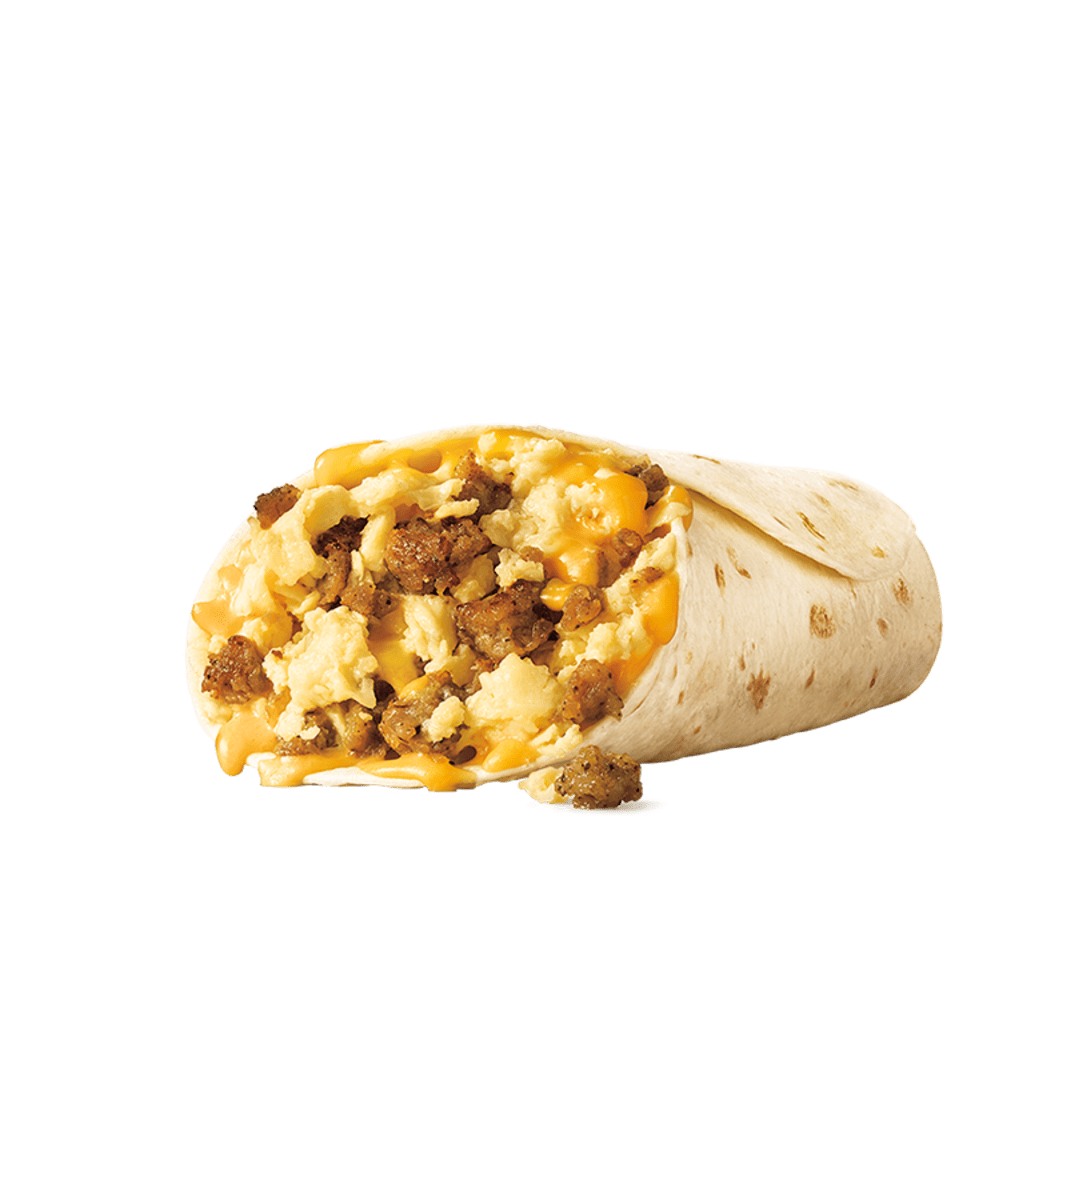 Sonic Drive In - Jr. Sausage, Egg and Cheese Breakfast Burrito